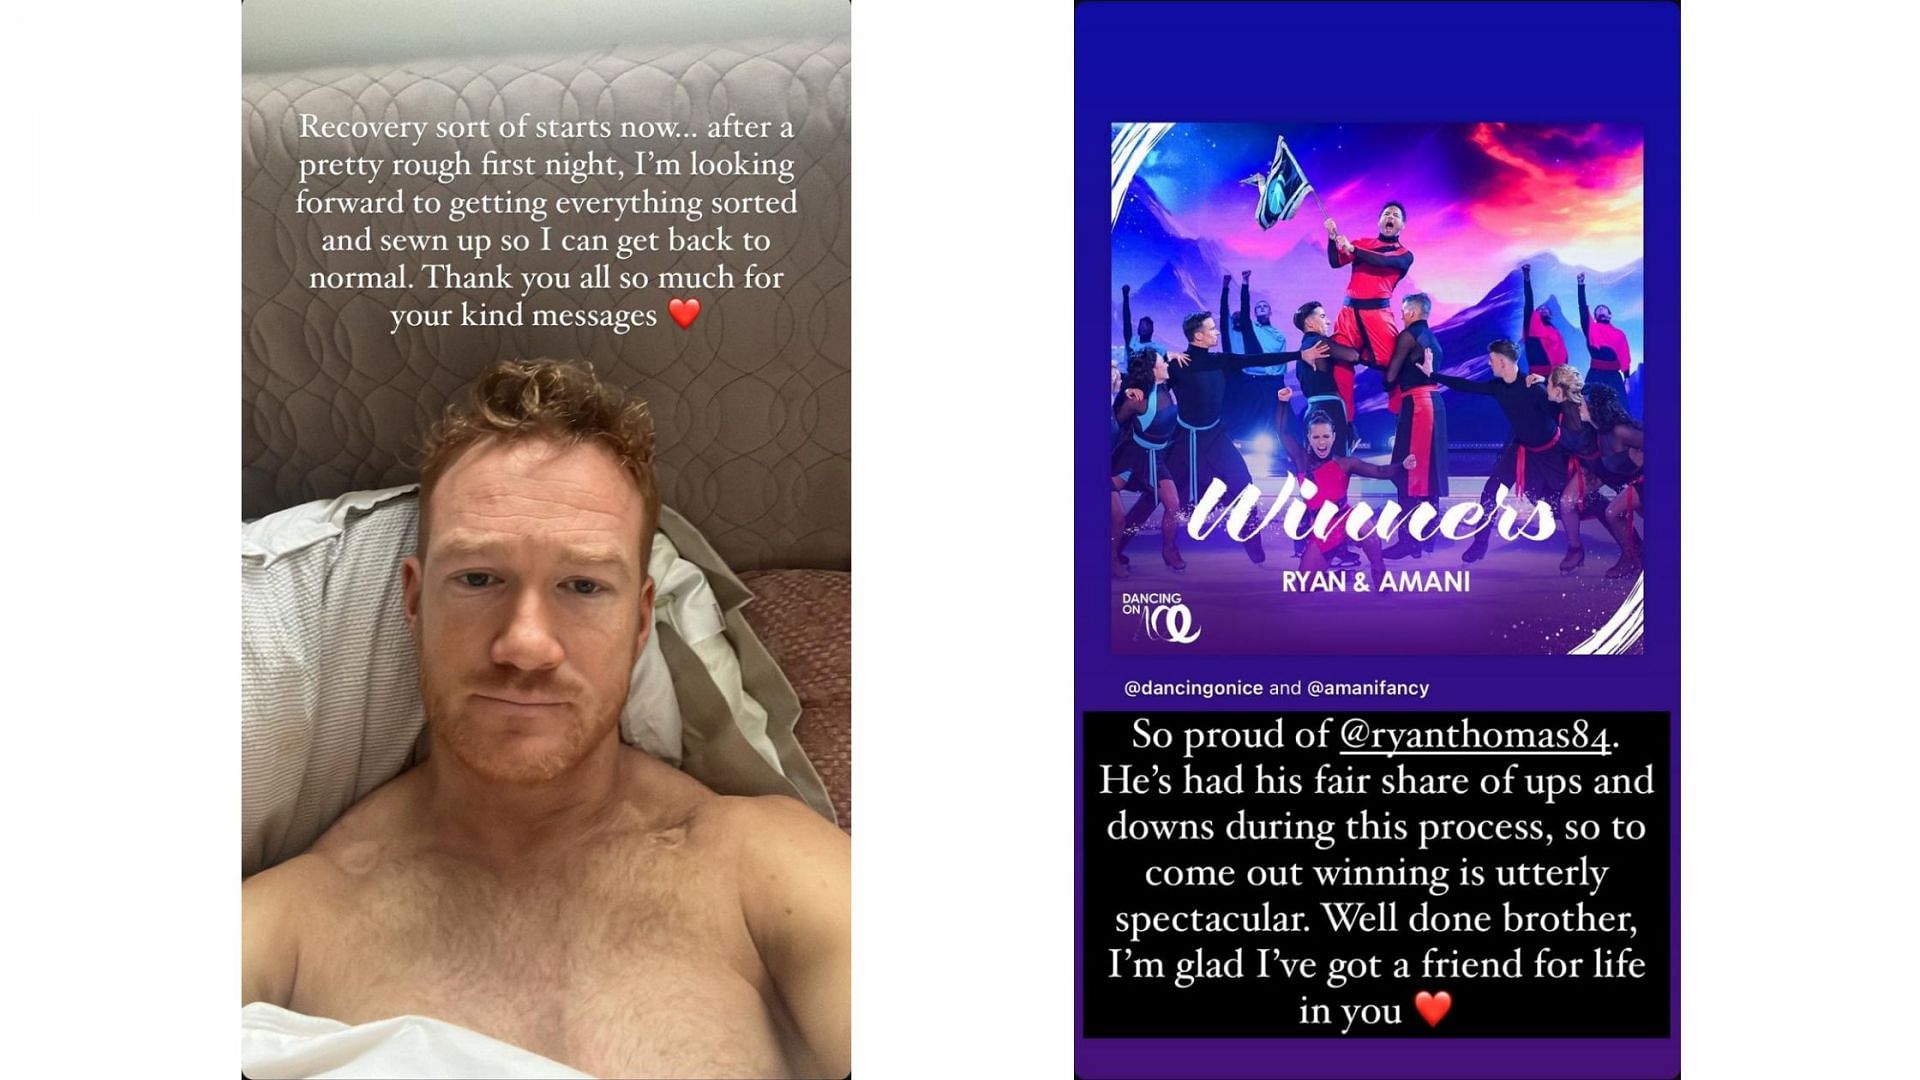 Greg Rutherford wished the winner of Dancing On Ice (Image via Instagram/gregjrutherford)